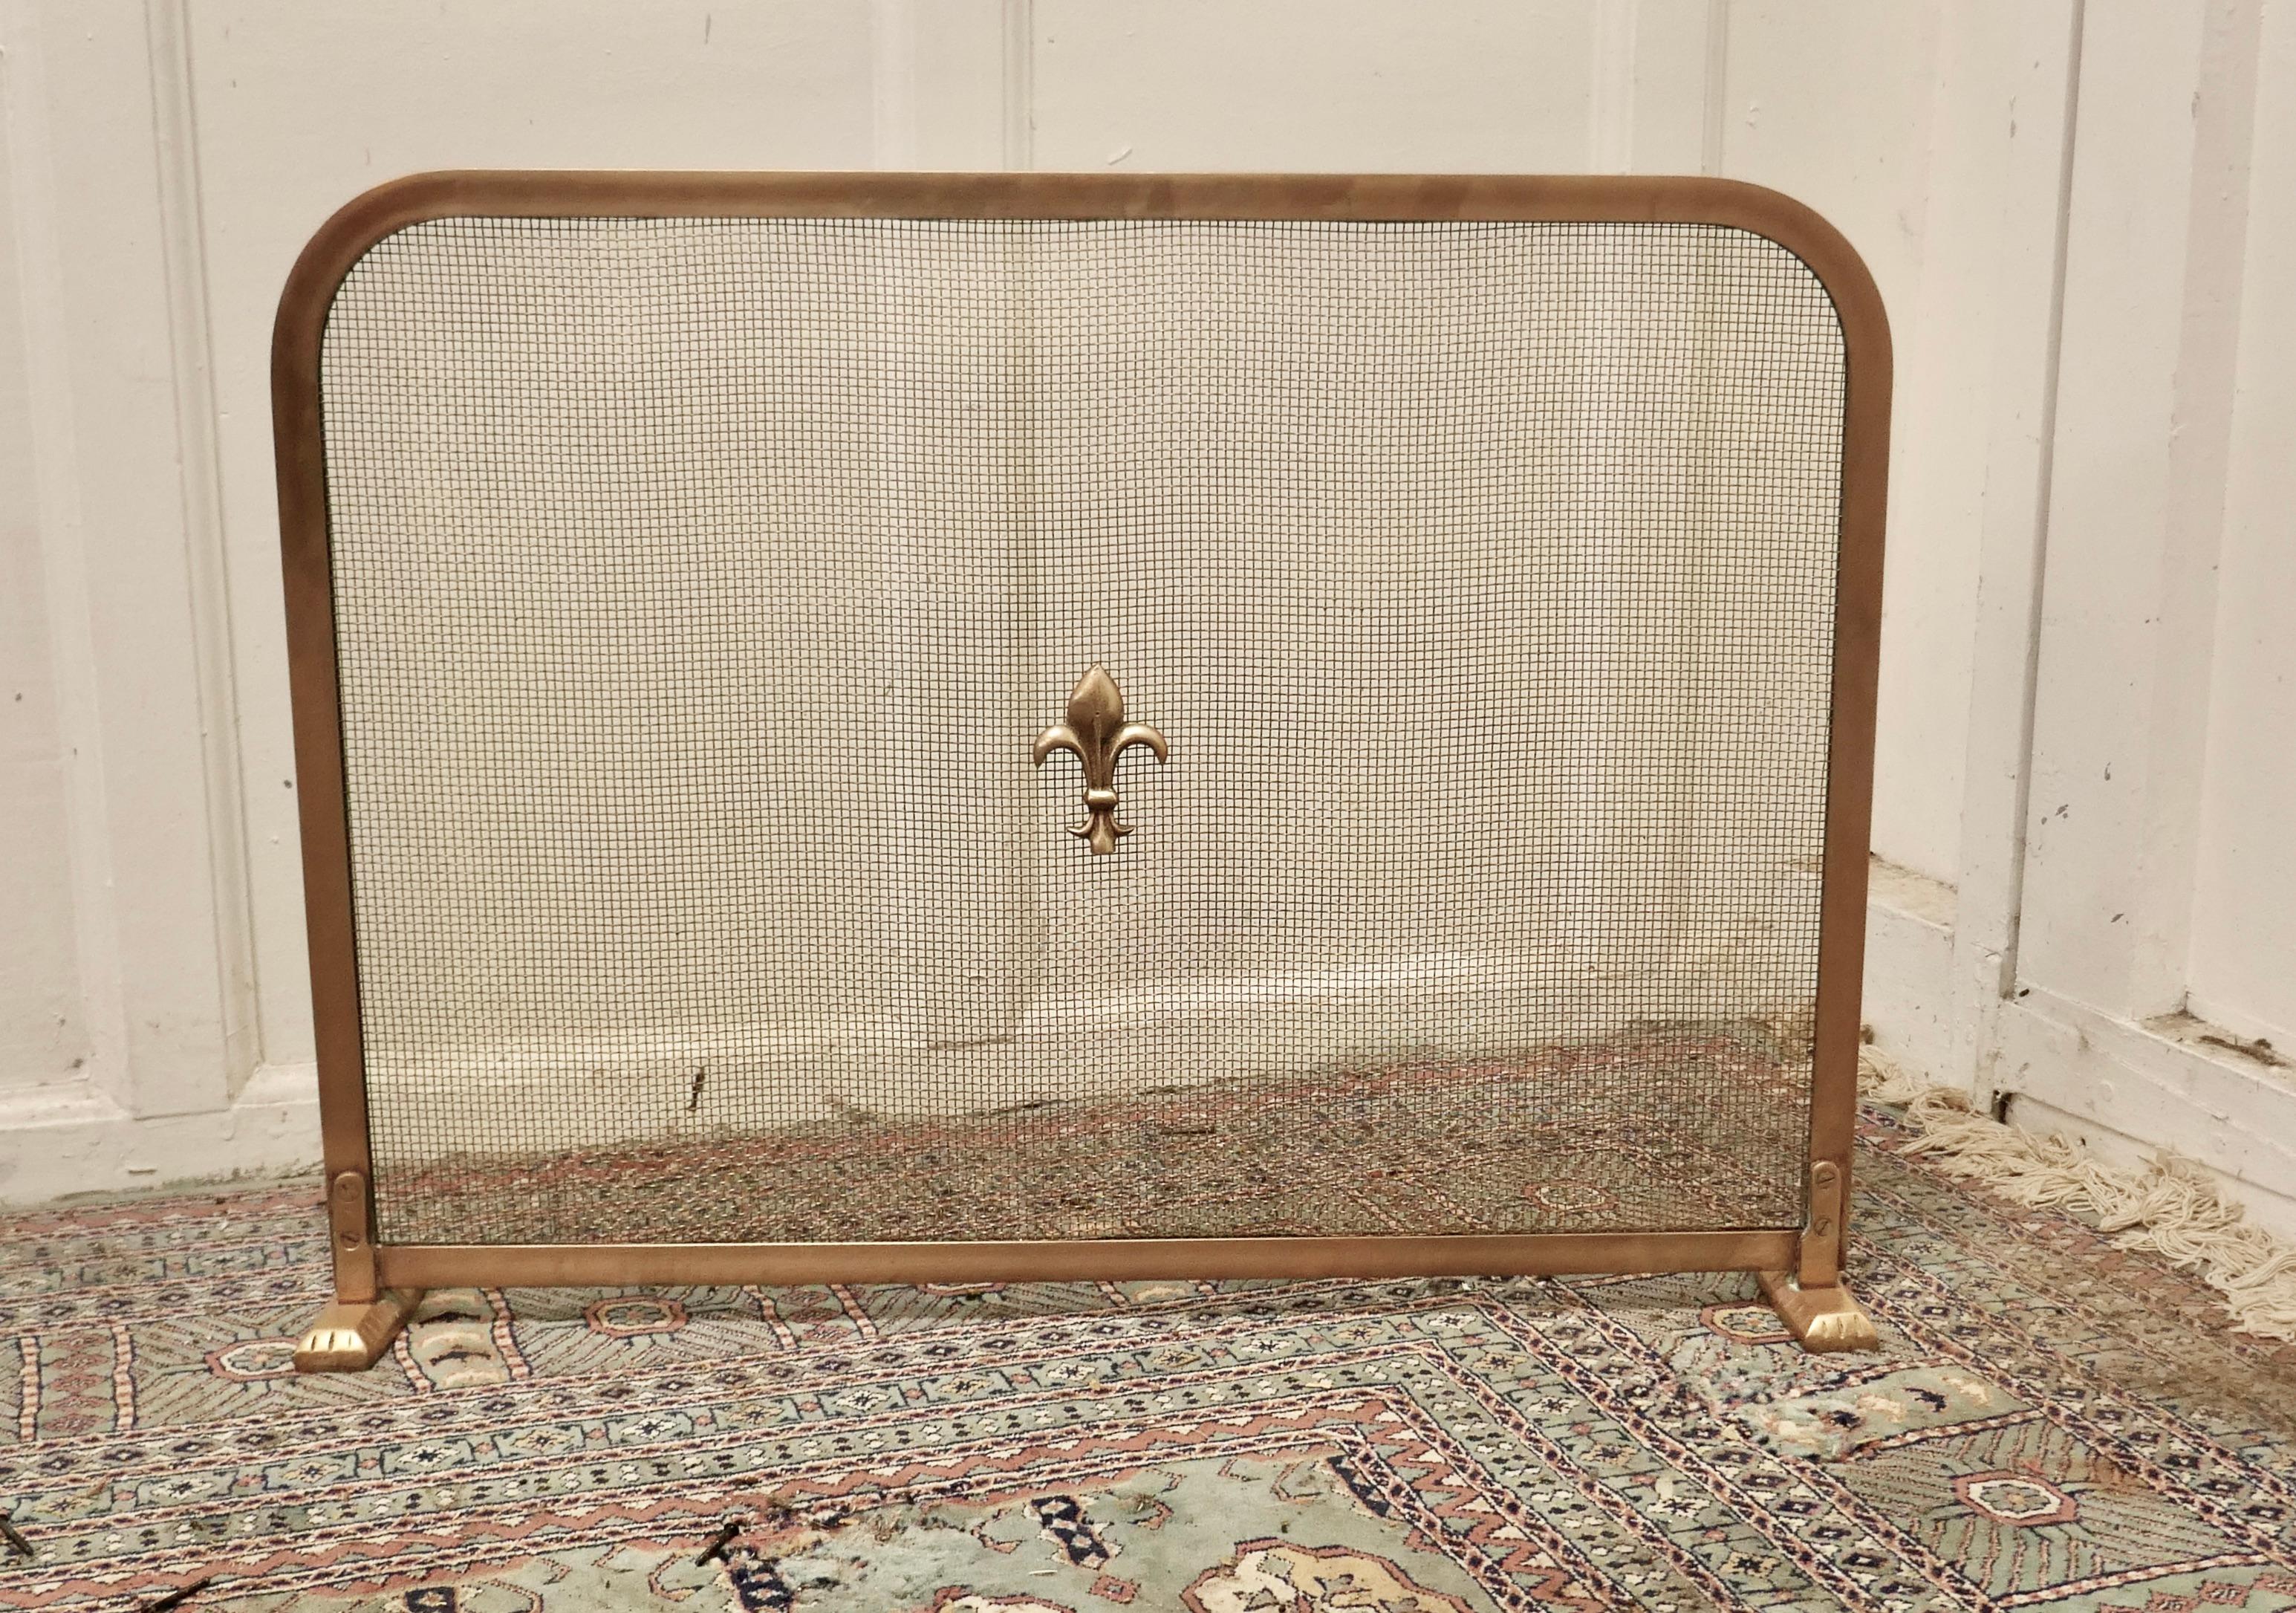 Victorian arts and crafts brass fire guard, spark screen

The Fire guard is a stylish good quality piece it is made in brass with a Fine mesh screen and has a “fleurs des lys decoration”.
A delightful decorative piece which is very practical and